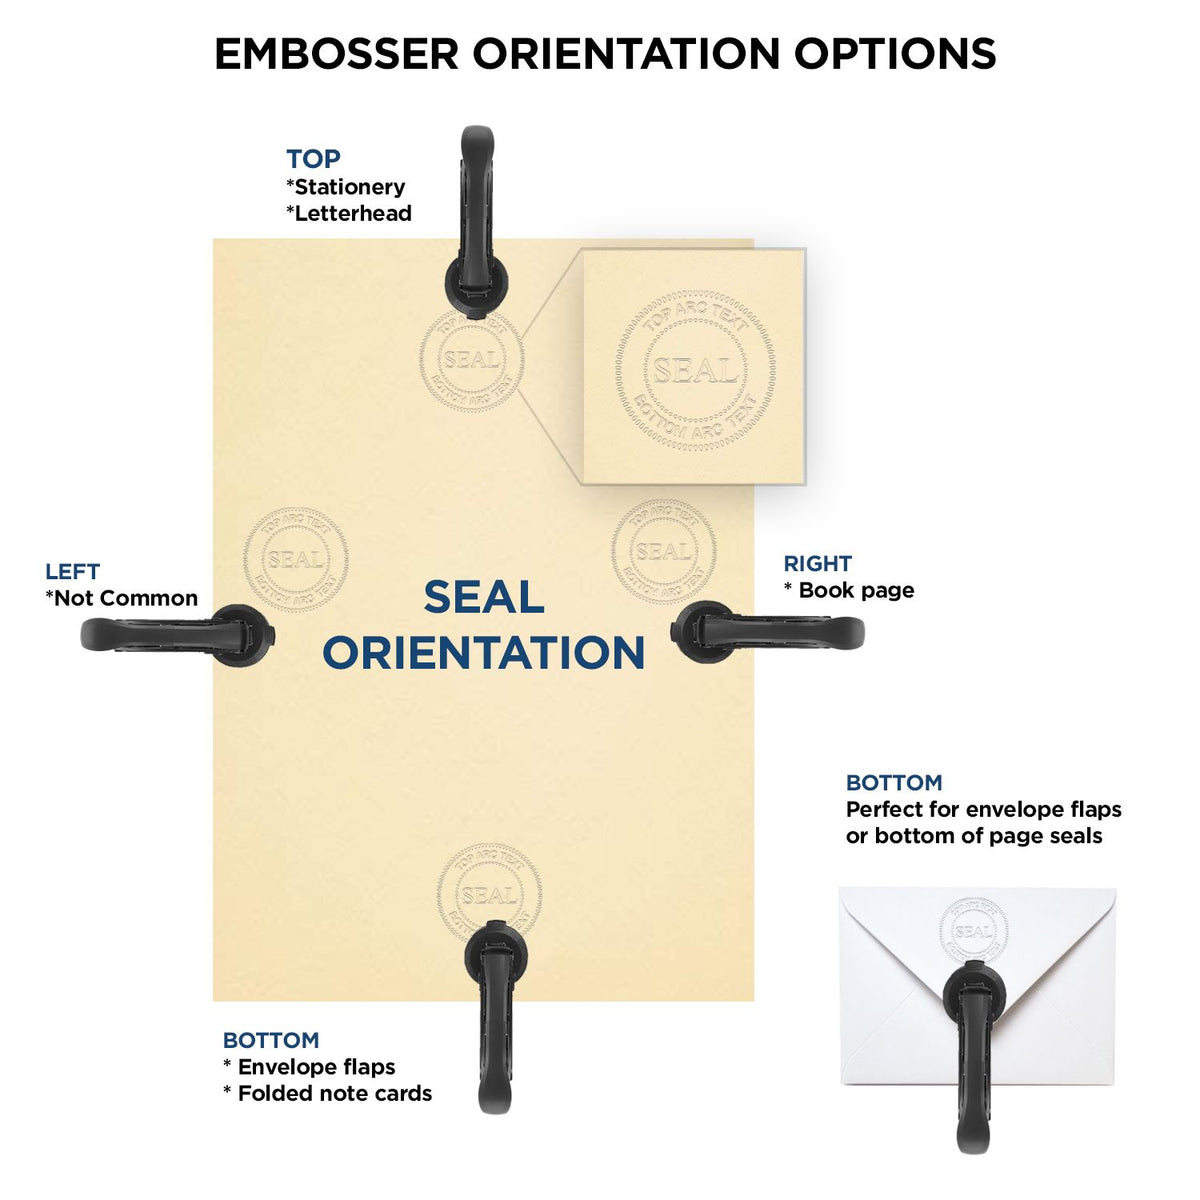 An infographic for the Gift West Virginia Engineer Seal showing embosser orientation, this is showing examples of a top, bottom, right and left insert.